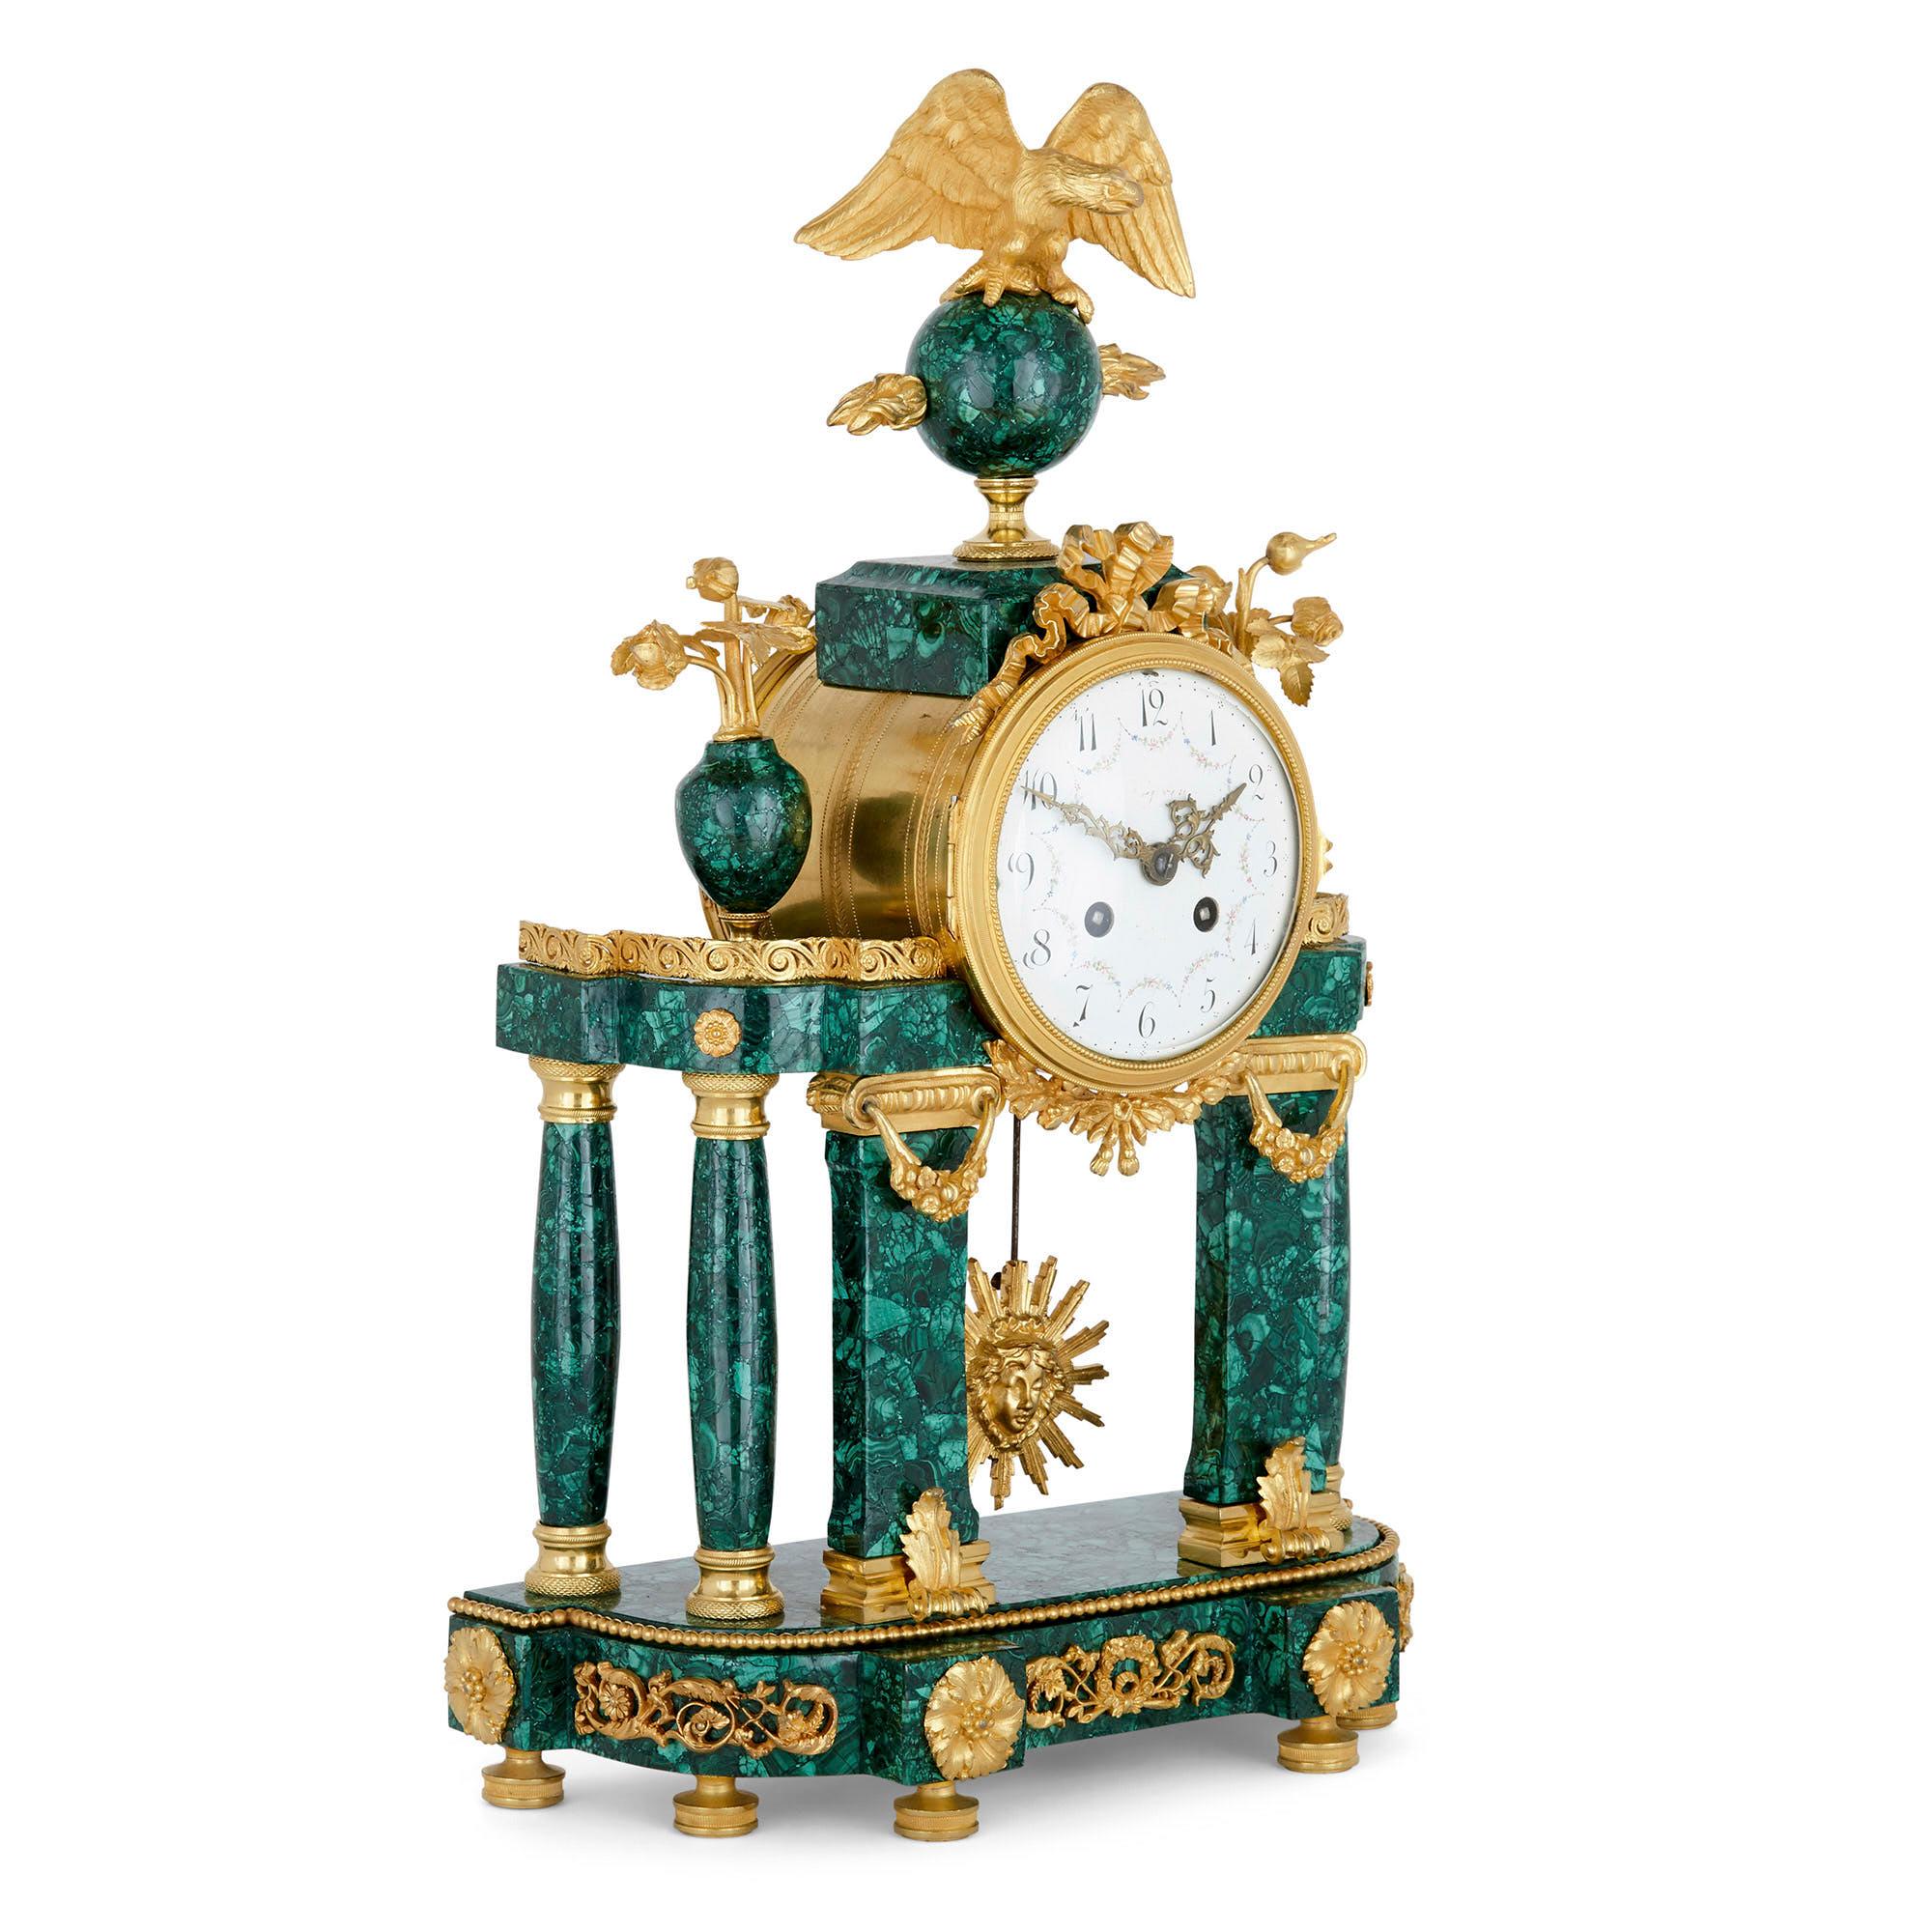 Neoclassical style French malachite and gilt bronze mantel clock
French, late 19th century
Dimensions: Height 48cm, width 30cm, depth 15cm

This neoclassical Louis XVI style mantel clock features a centrally placed circular enamel dial with